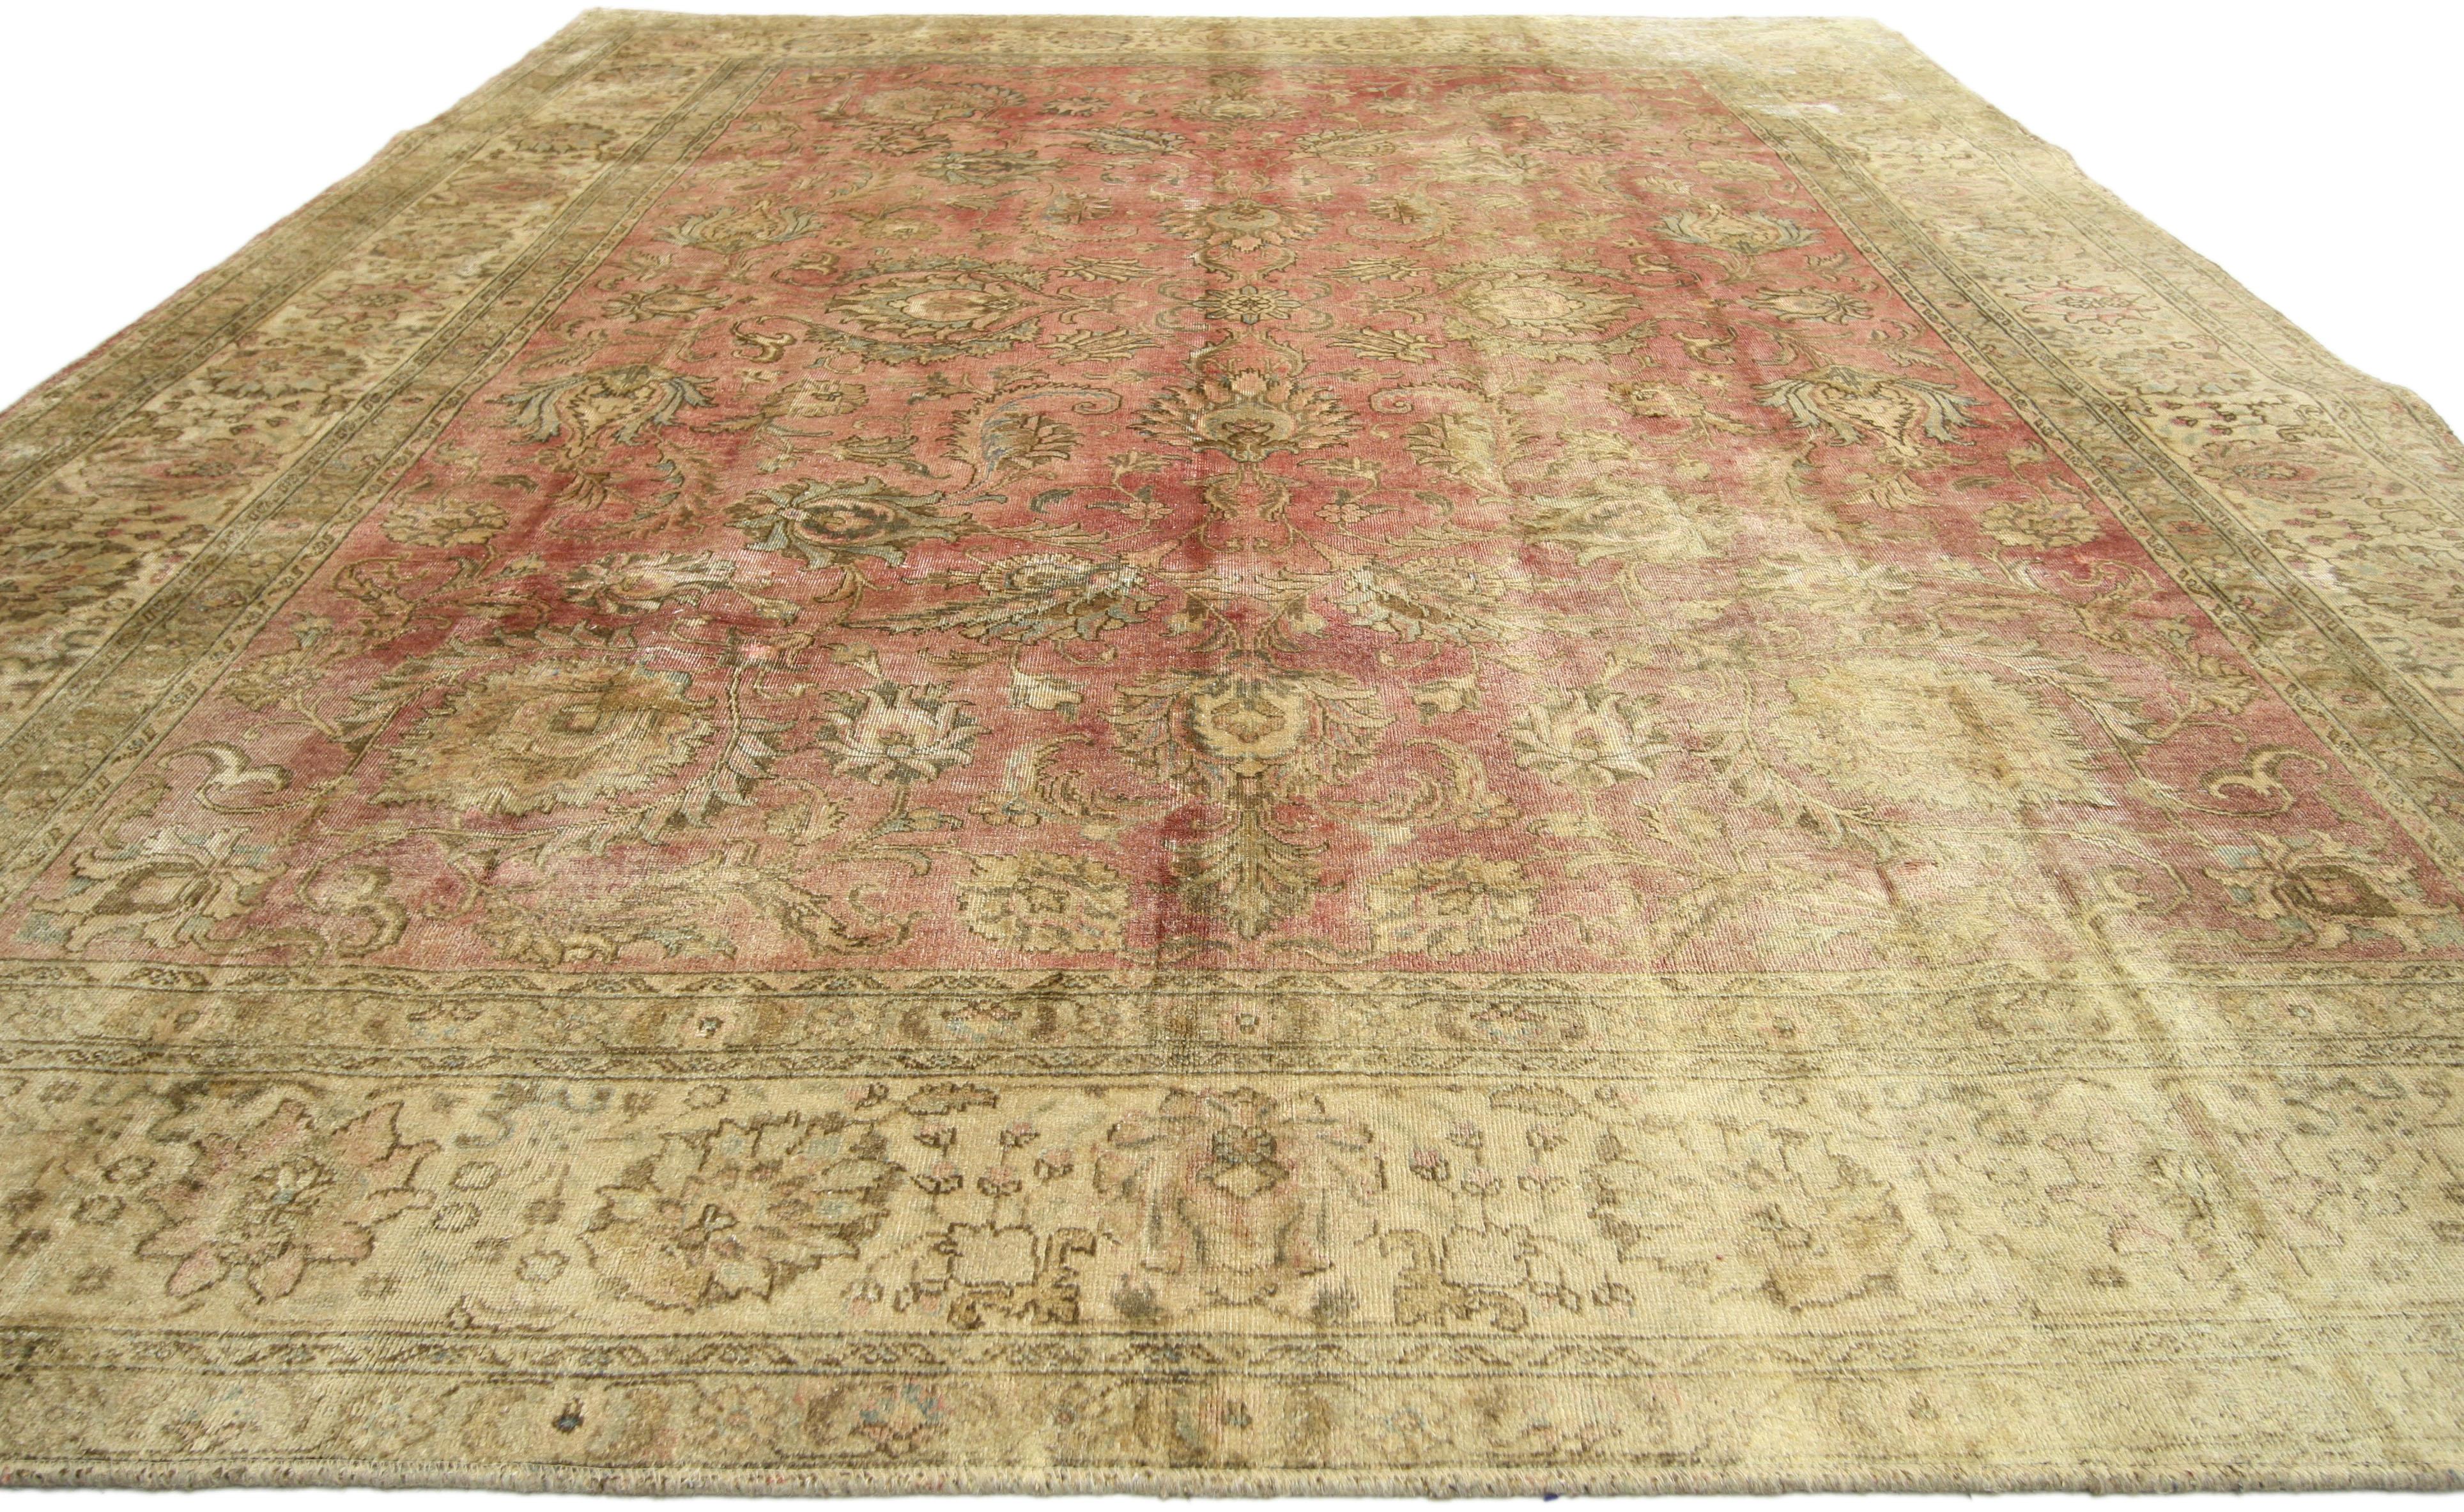 Wool Distressed Antique Persian Tabriz Rug Industrial Rustic Style For Sale